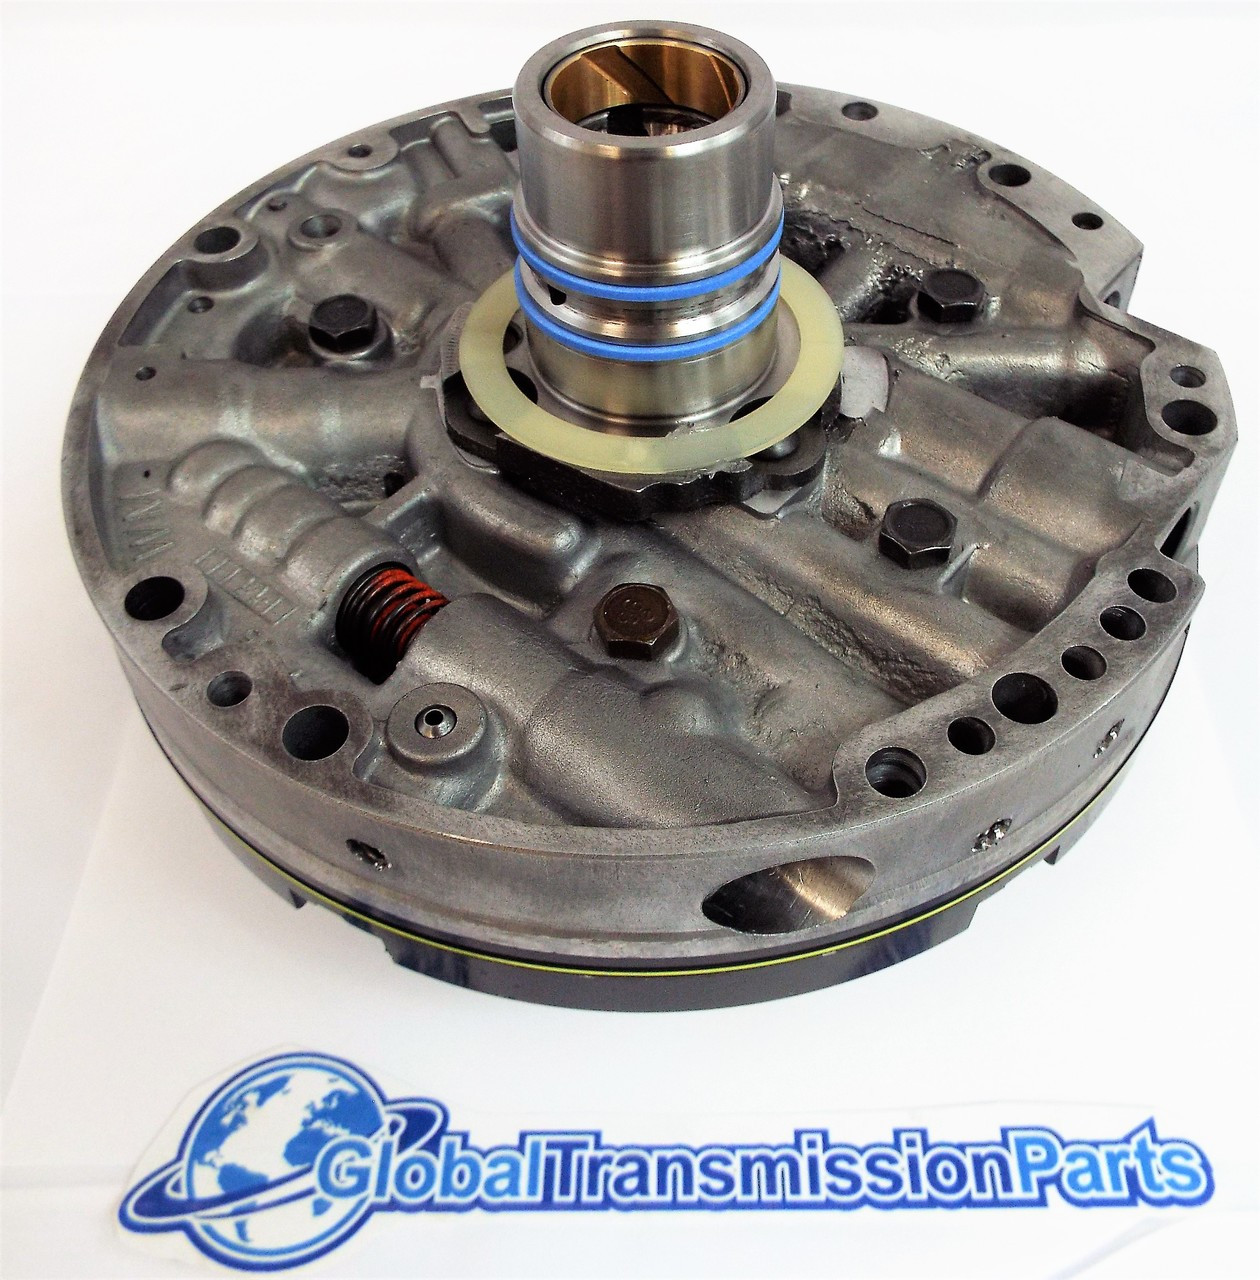 GM 4L60E Transmission Pump.  Rebuilt by leading industry professionals.  Sonnax Boost Valve Upgrade Installed!  1995-2003 Model Vehicles, 10 Vane with no lip.